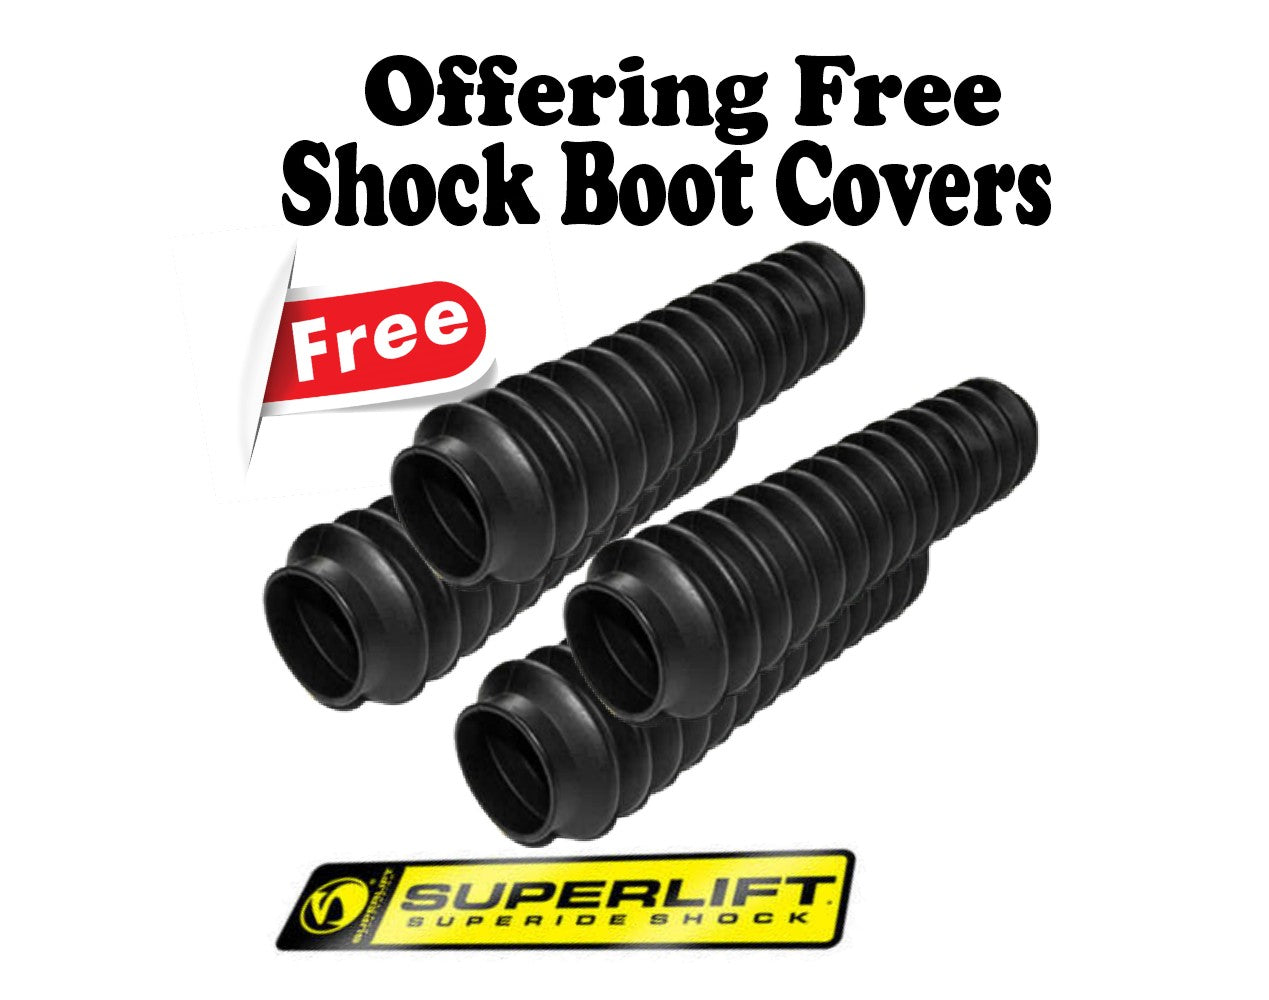 Superlift 2005-2007 Ford F-250 F-350 Super Duty Diesel 4 inch Suspension Lift Kit With Fox 2.0 Shocks Without 4-Link Conversion 4WD K796FX